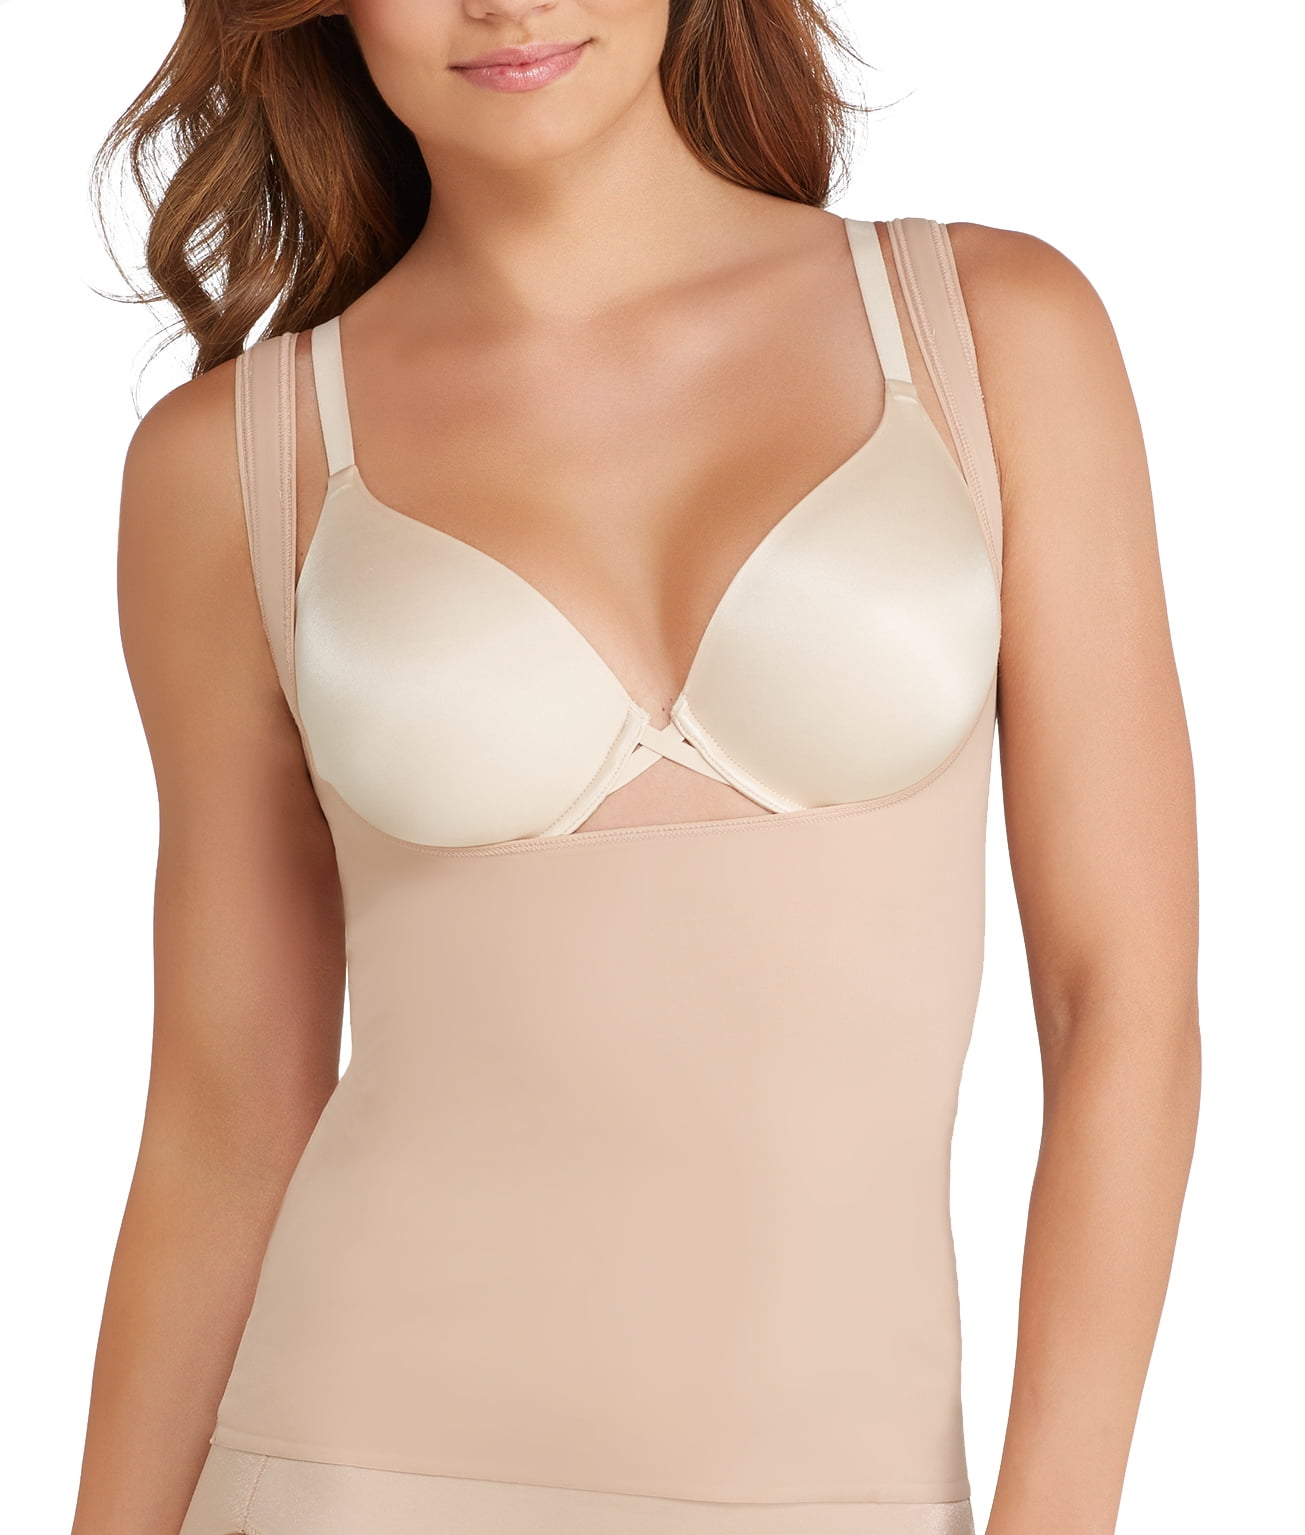 NEW SPANX WOMENS SHAPEWEAR ASSETS OPEN BUST CAMI IN NUDE SIZE 2XL